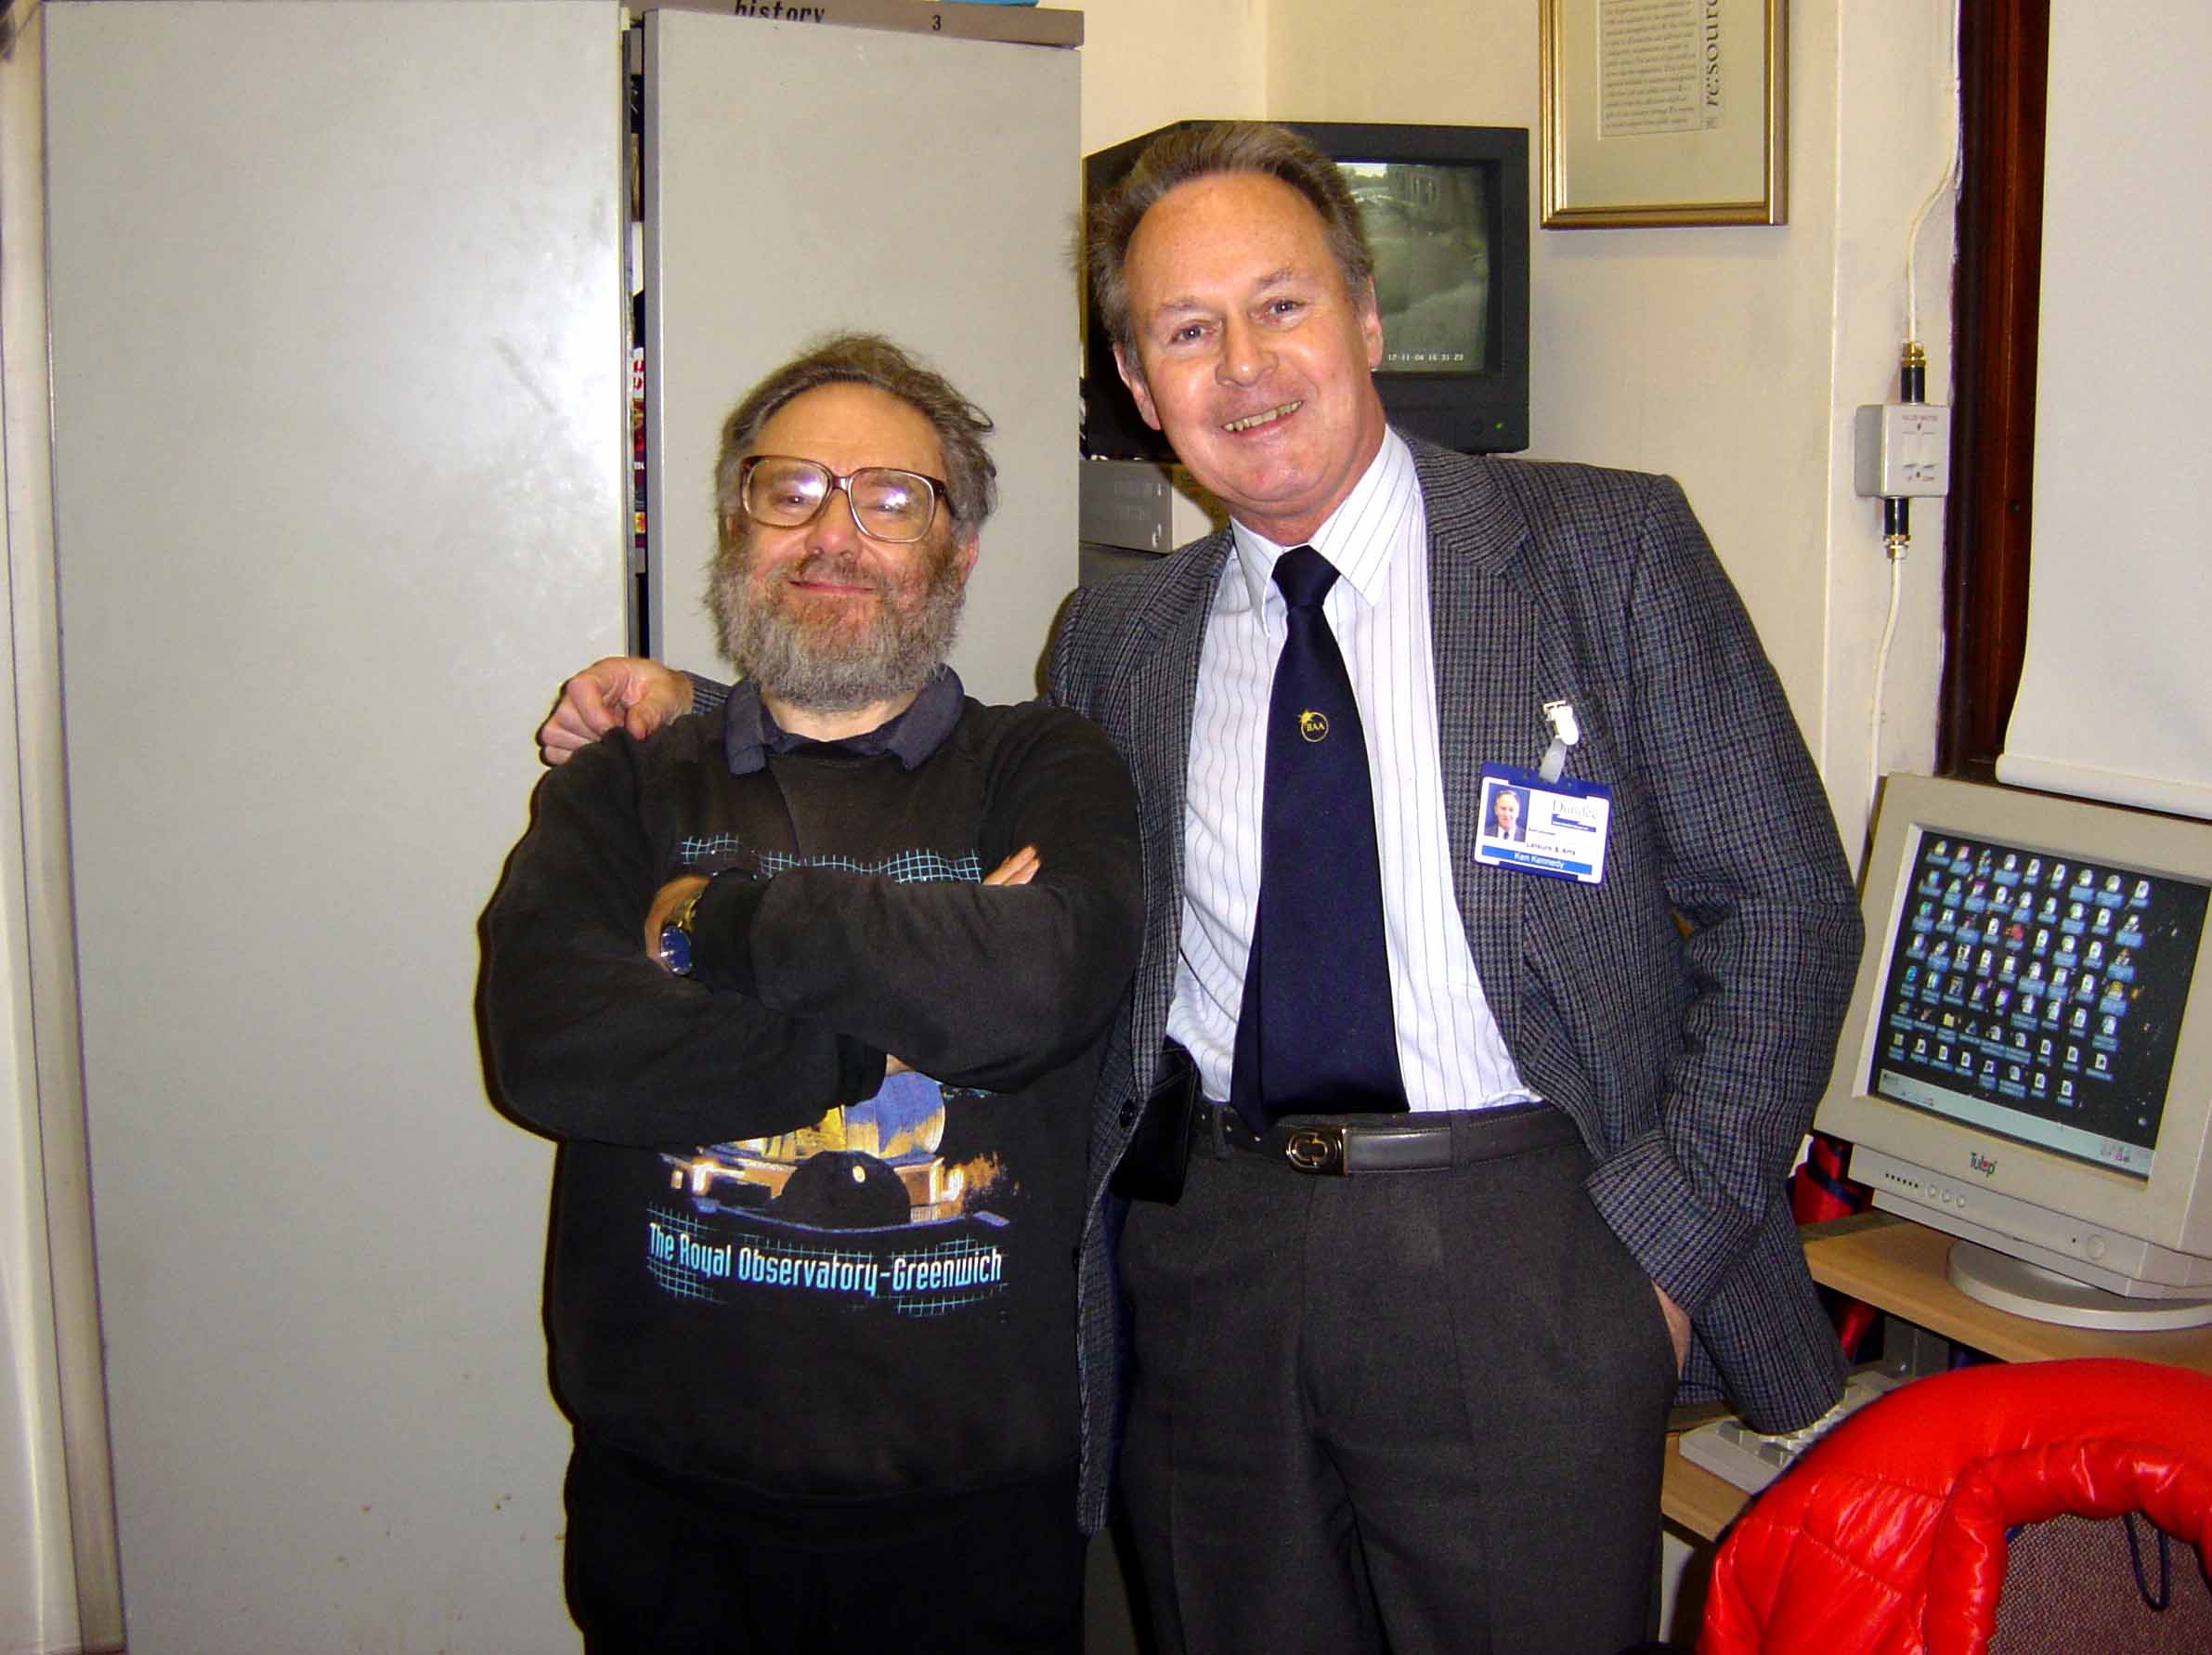  Final image.. Harry and Ken at the Mills Observatory 12th November 2004.